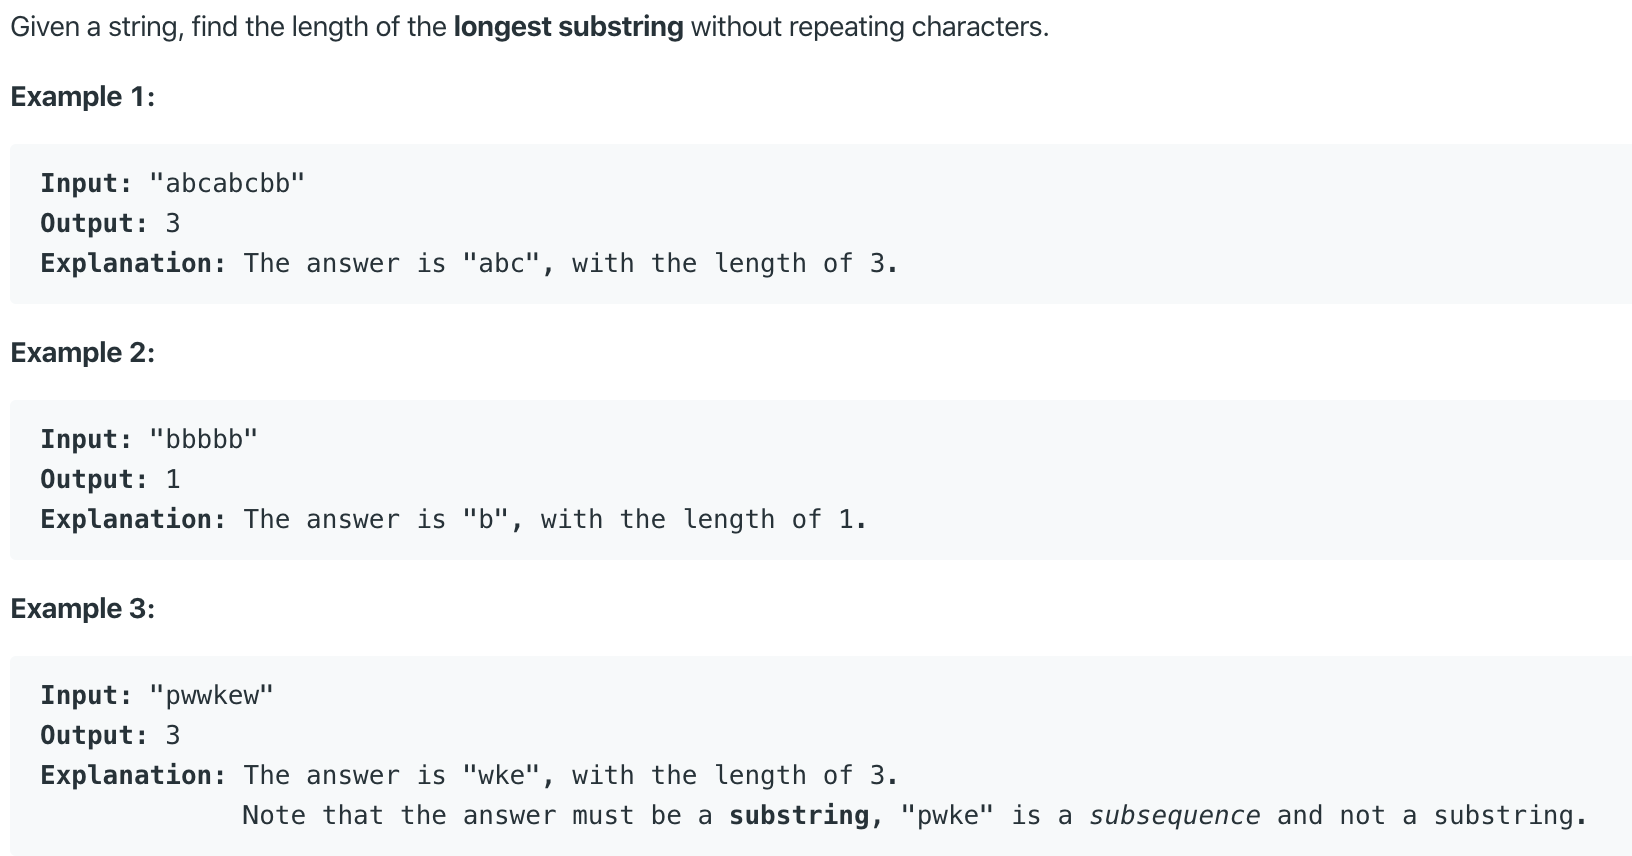 https://leetcode.com/problems/longest-substring-without-repeating-characters